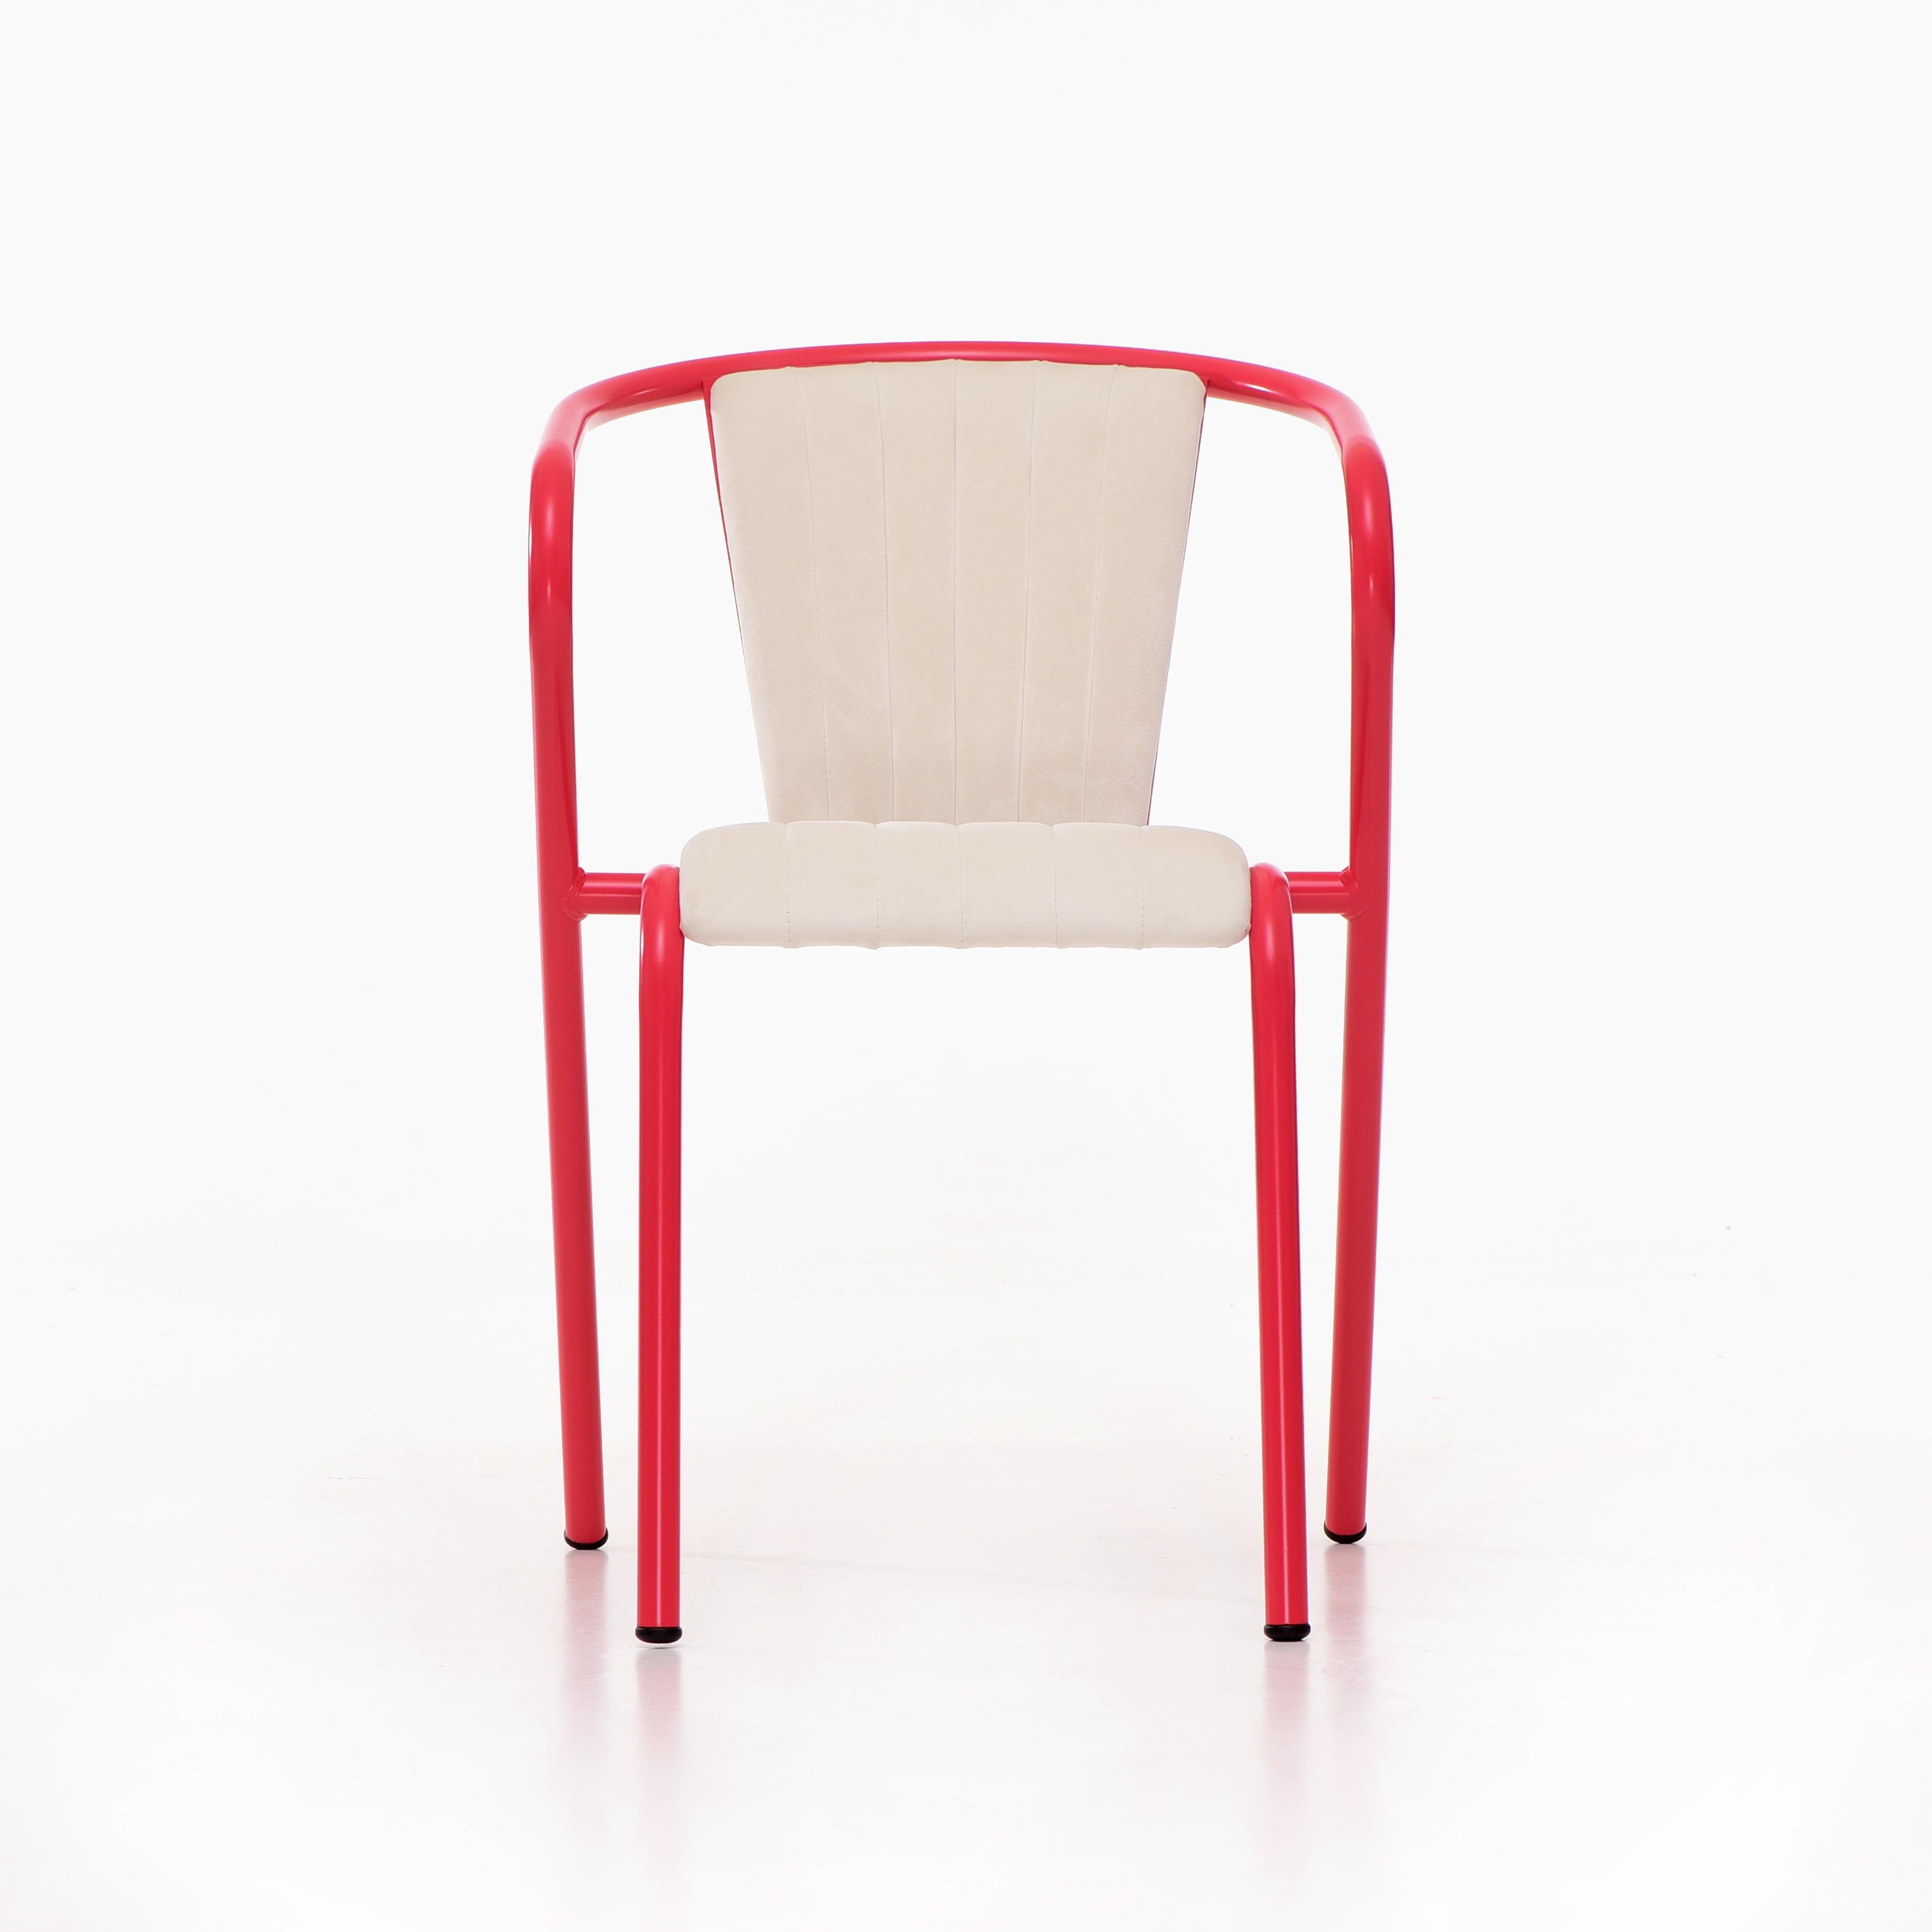 BICAchair is a stackable steel dining armchair made from recycled and recyclable steel, finished with our premium selection of powder-coating colors, in this case in bright Red-pink color, that transforms a Classic in something new and vibrant. The